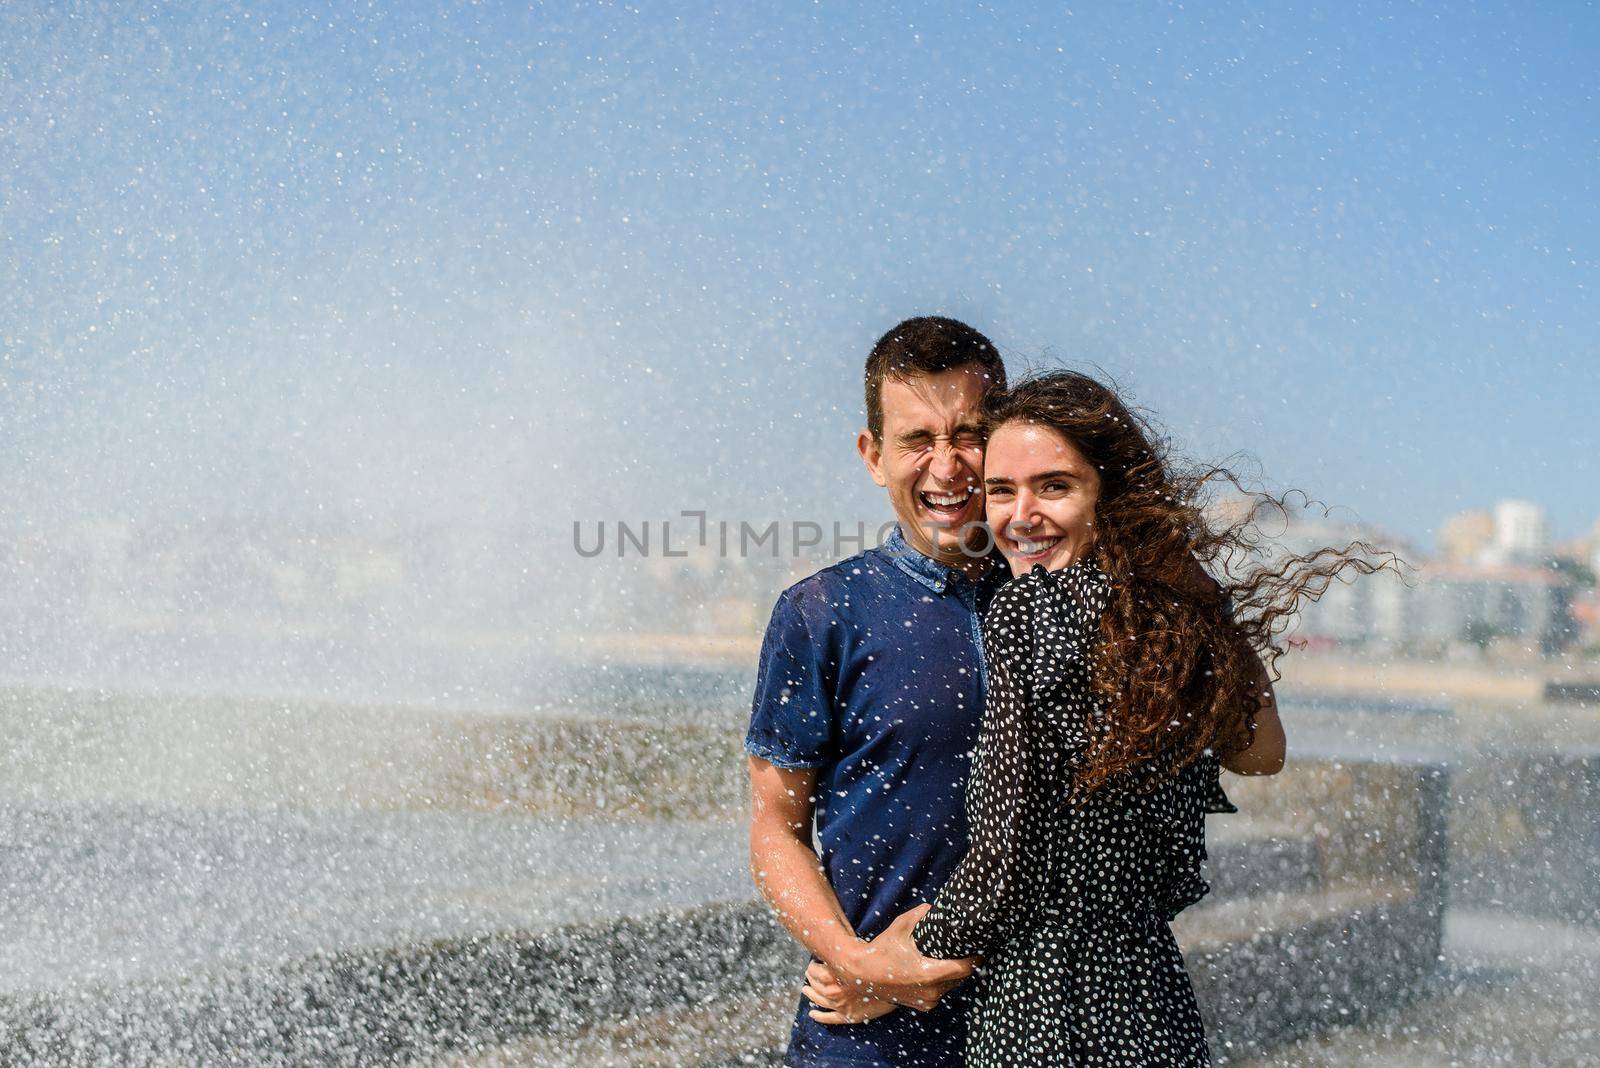 Splashing a wave of the ocean on two people in love. Lifestyle of couple. Having fun and laughs. Porto, Portugal, near Atlantic ocean by Rabizo